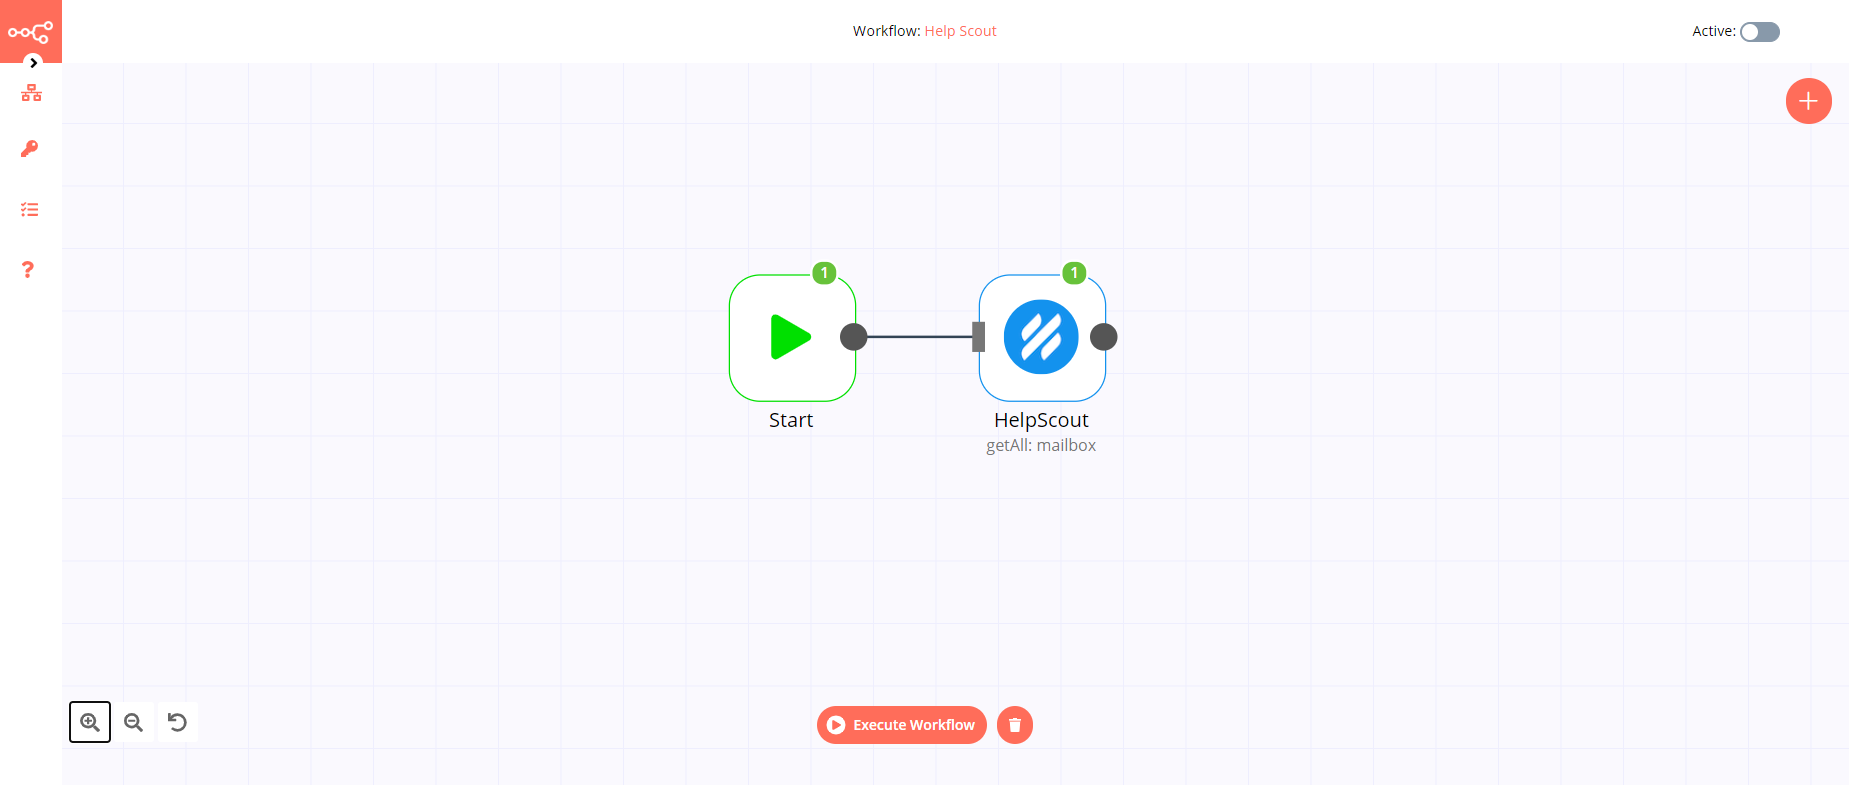 A workflow with the Help Scout node